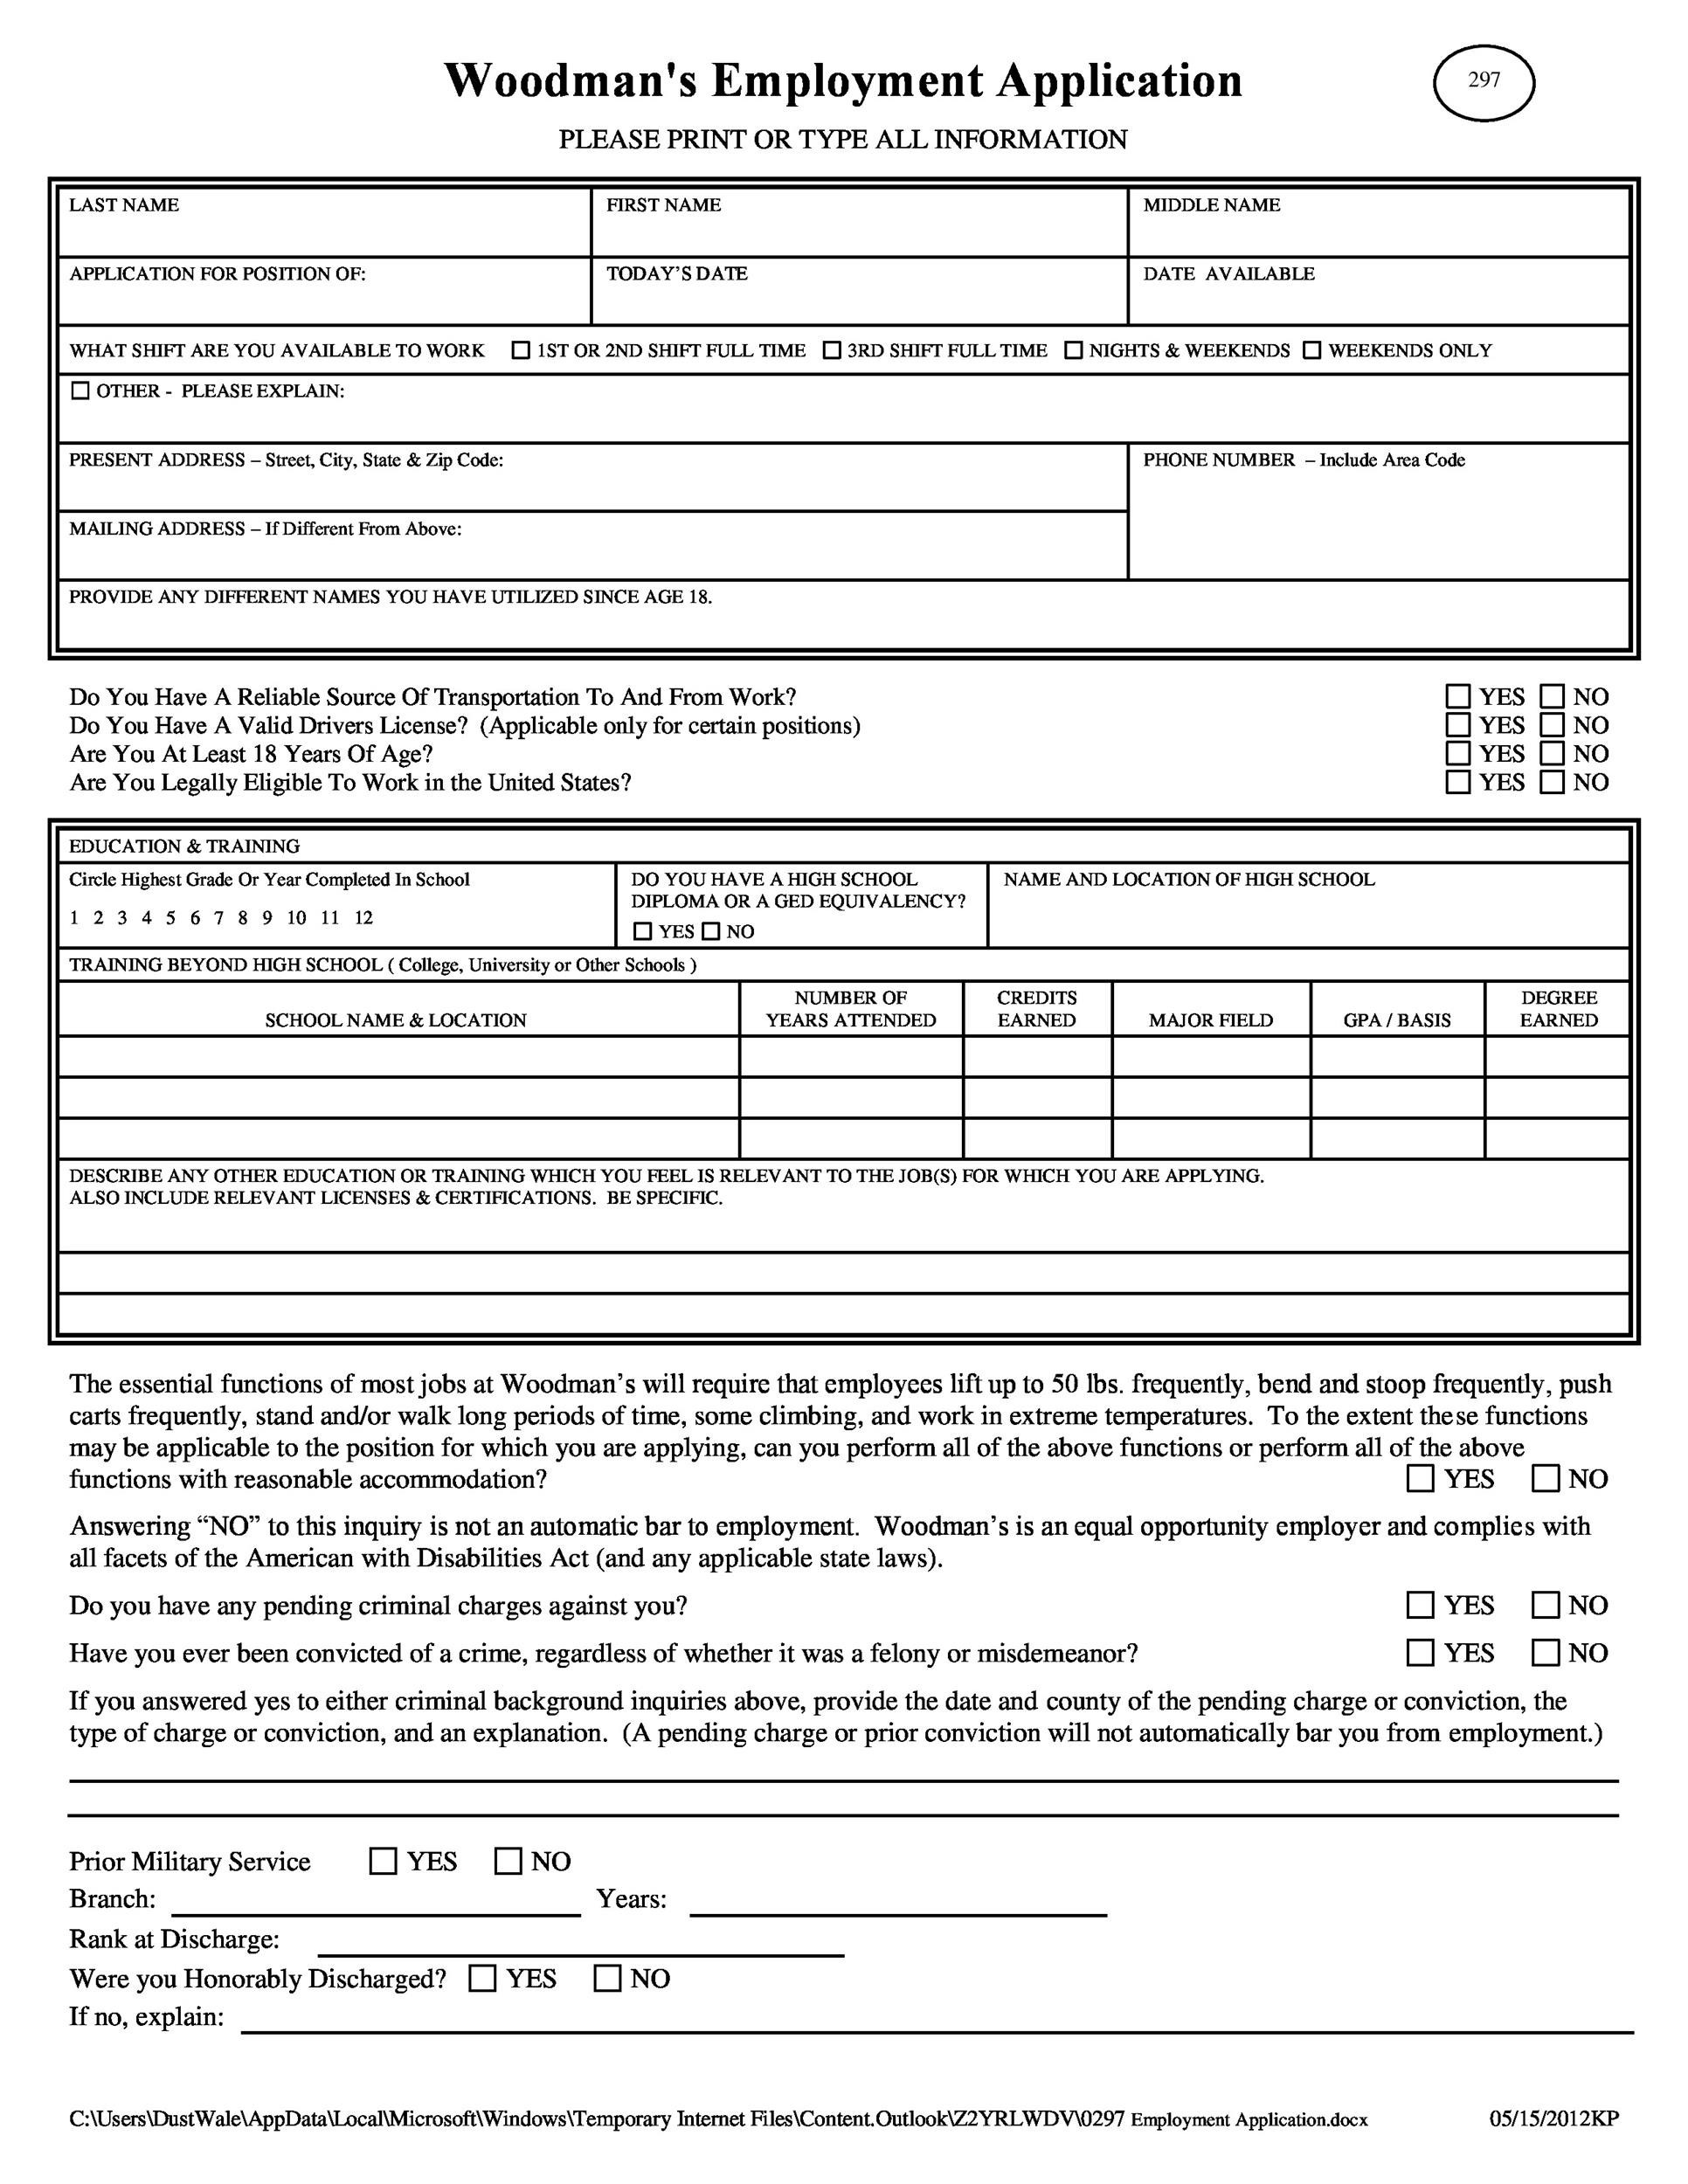 Free Printable Employment Application Form Create Job Applications In Minutes 